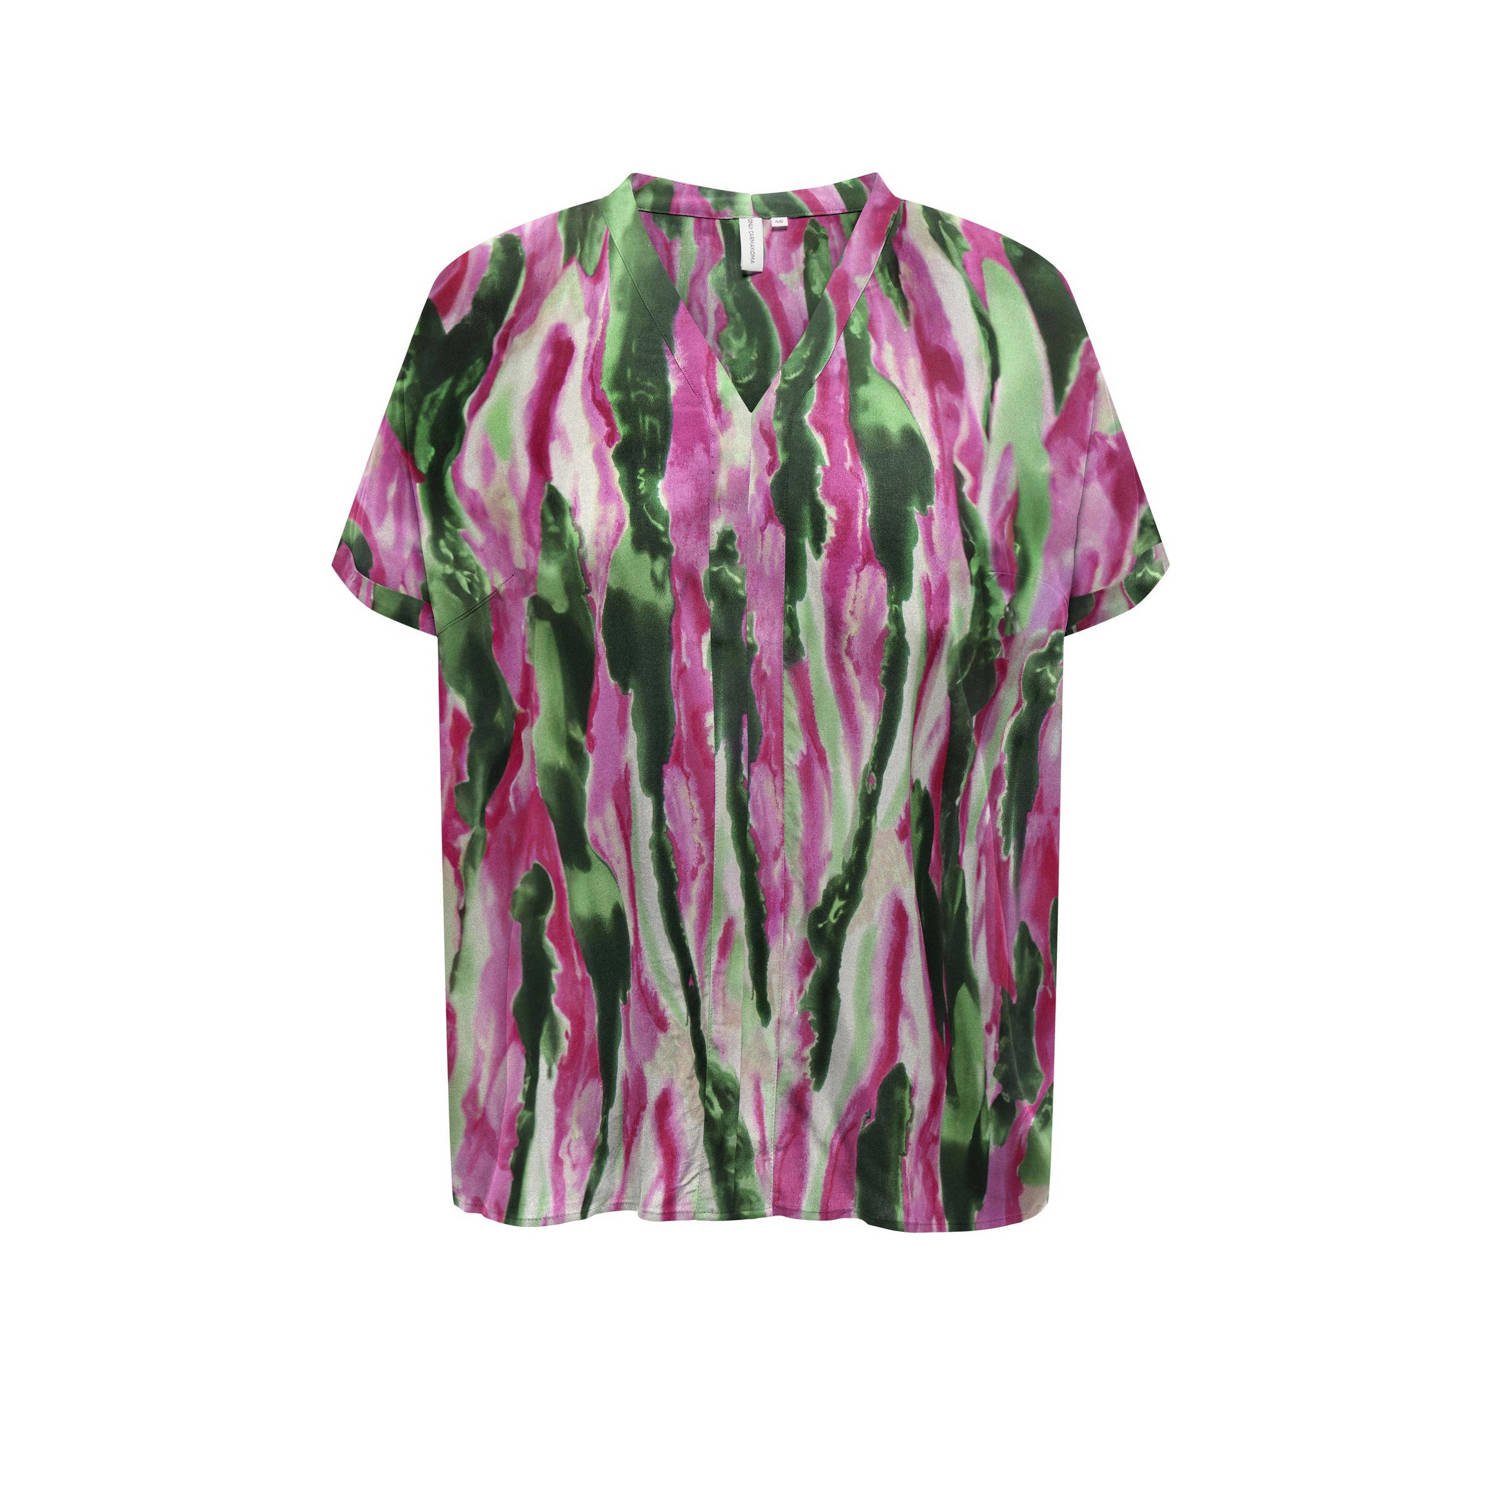 ONLY CARMAKOMA top CARNATA DODIE met all over print roze groen